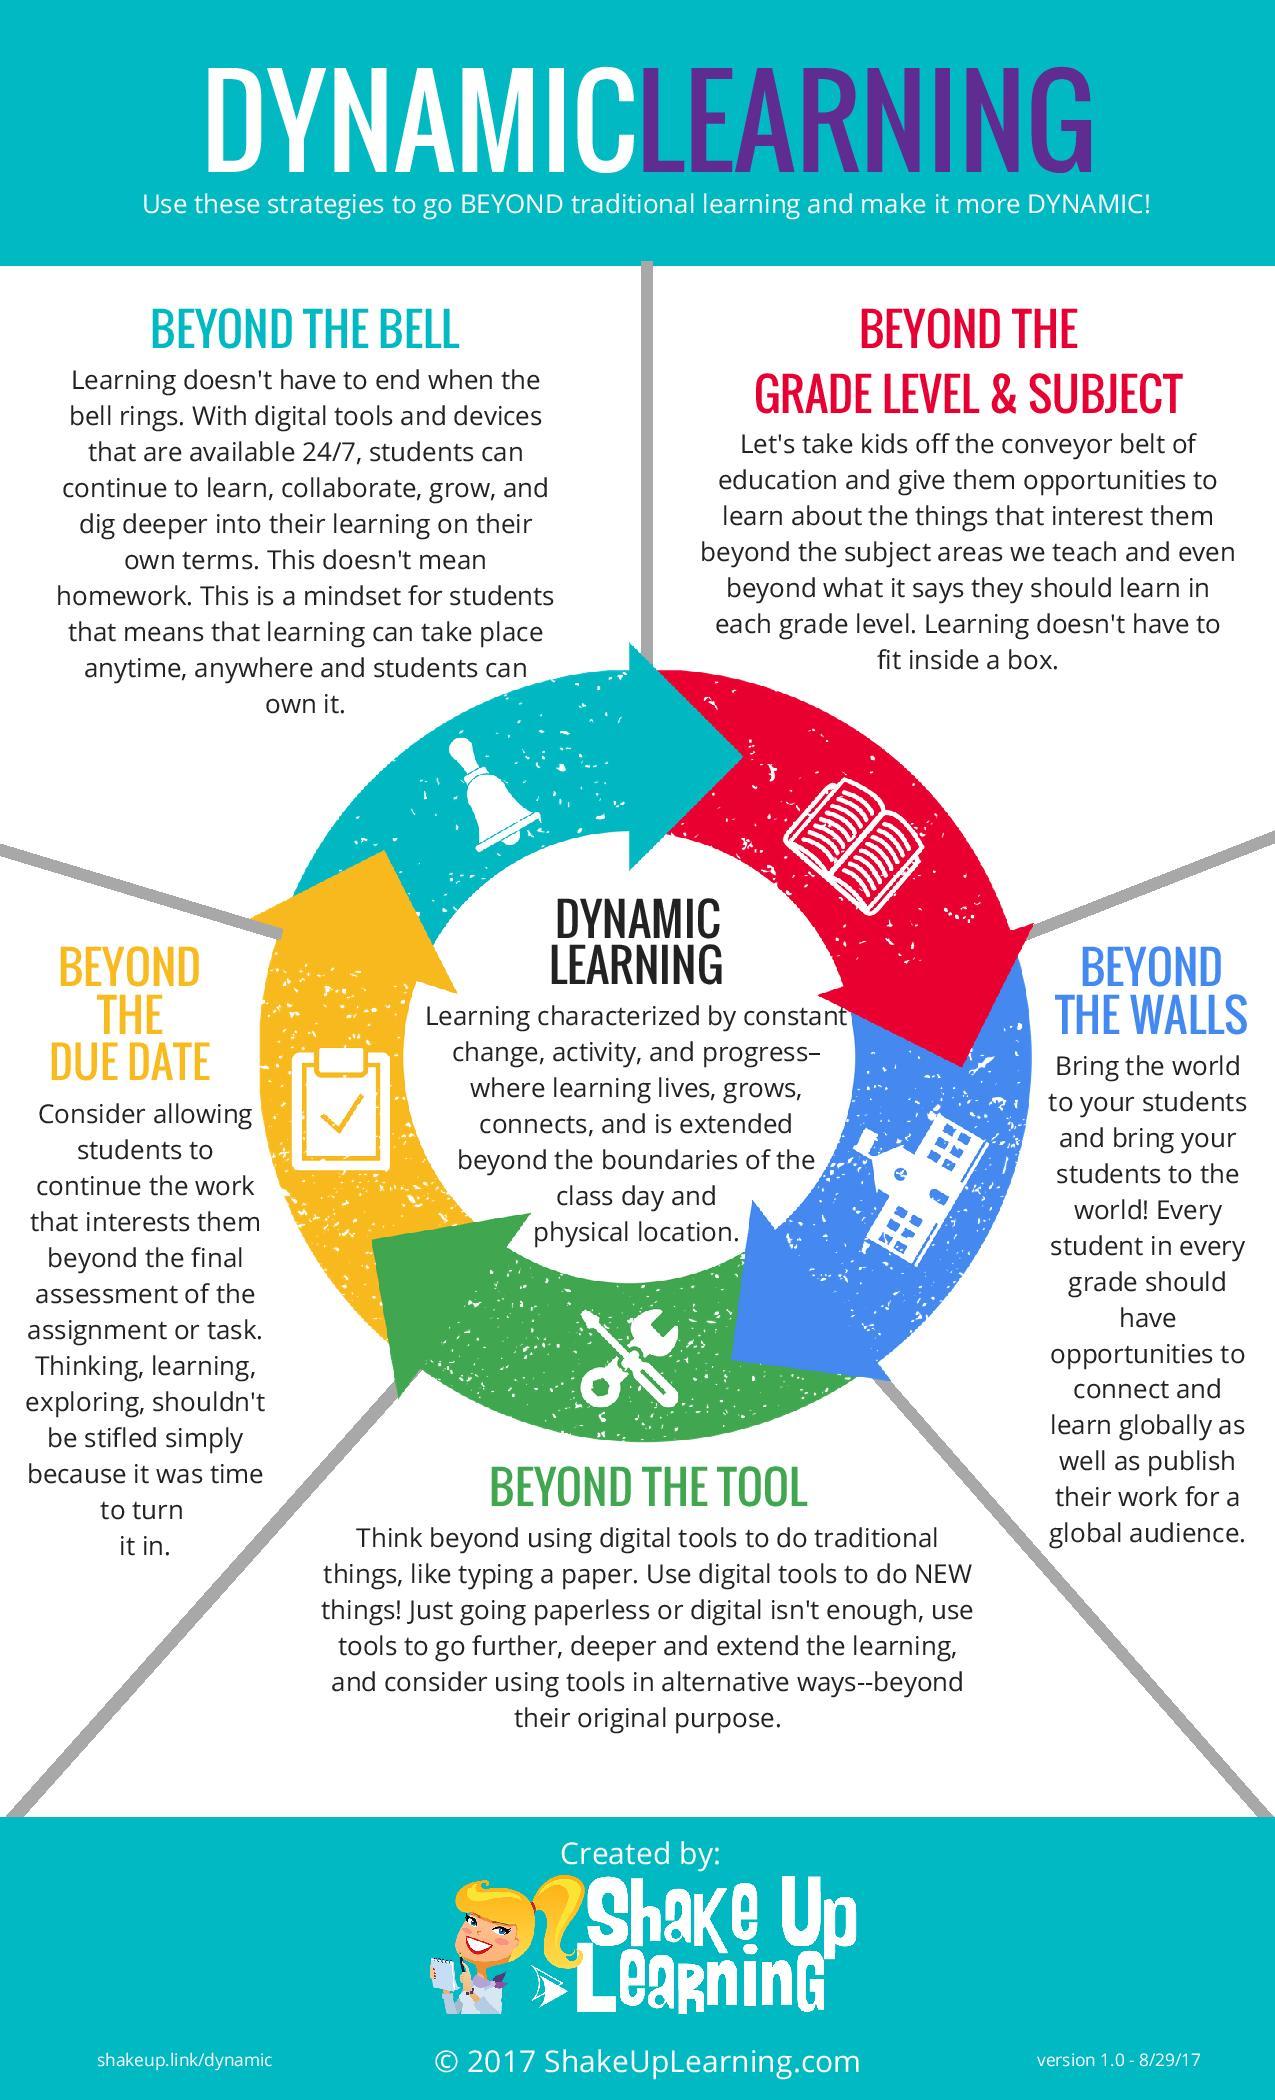 10 Great Examples of Using Infographics for Education - Easelly Infographic Maker